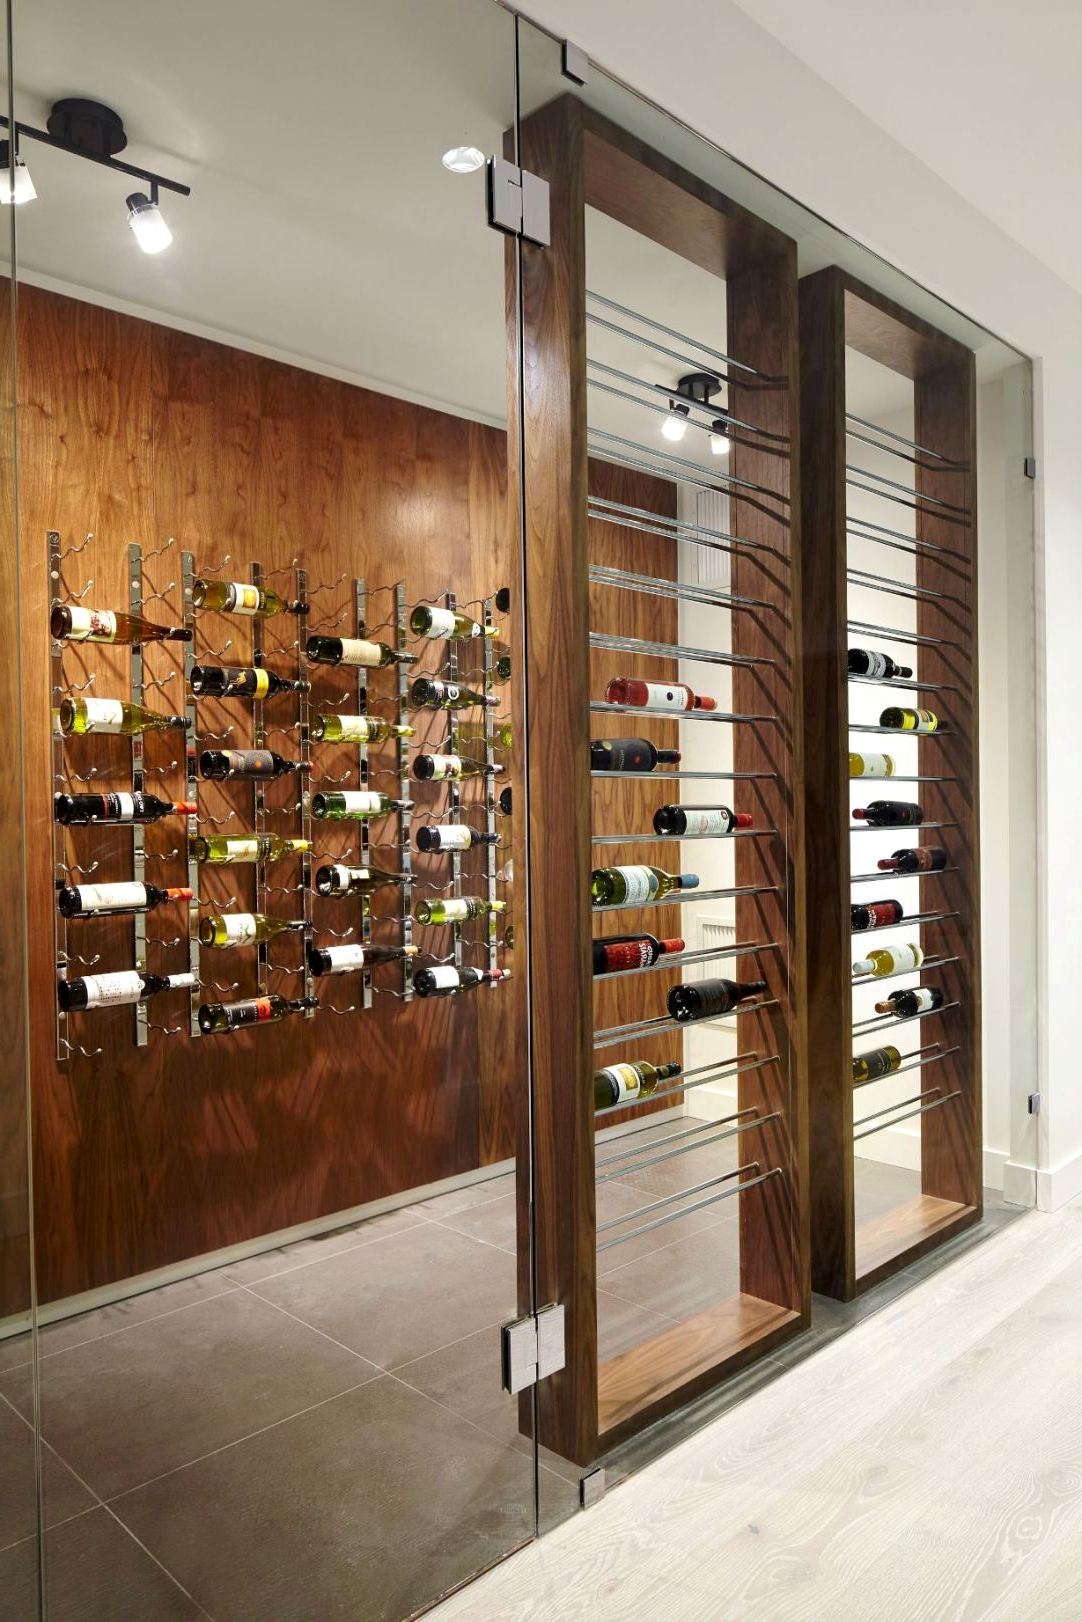 Customized Wine Rack Design Created by an Seattle Builder for a Residential Property